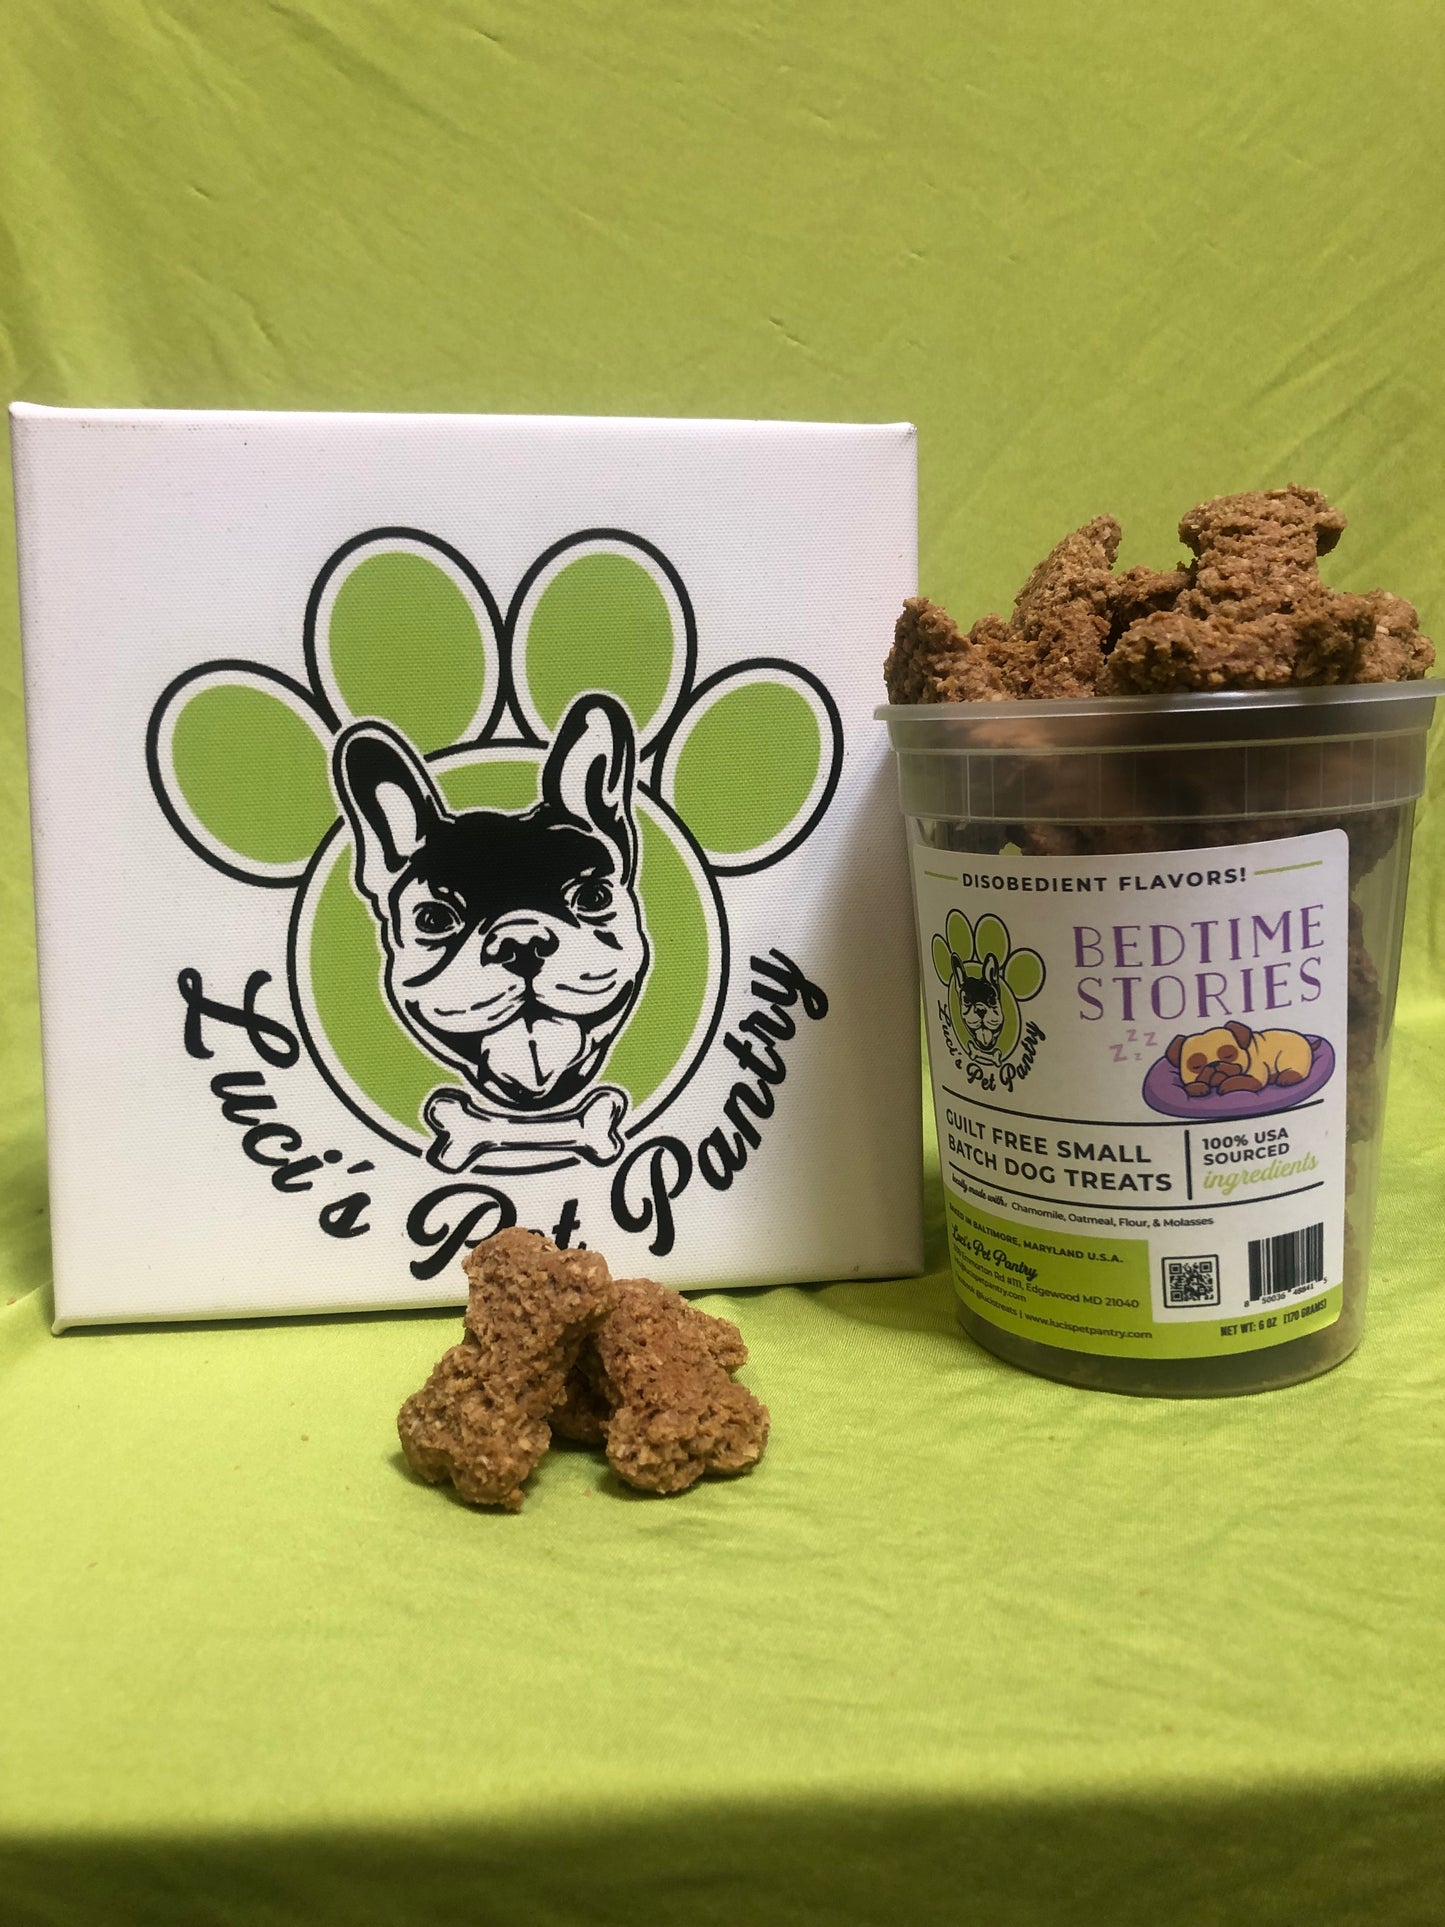 Bedtime Stories - All Natural Calming & Relaxing "Chamomile" Dog & Puppy Treats - Disobedient Tub of Biscuits